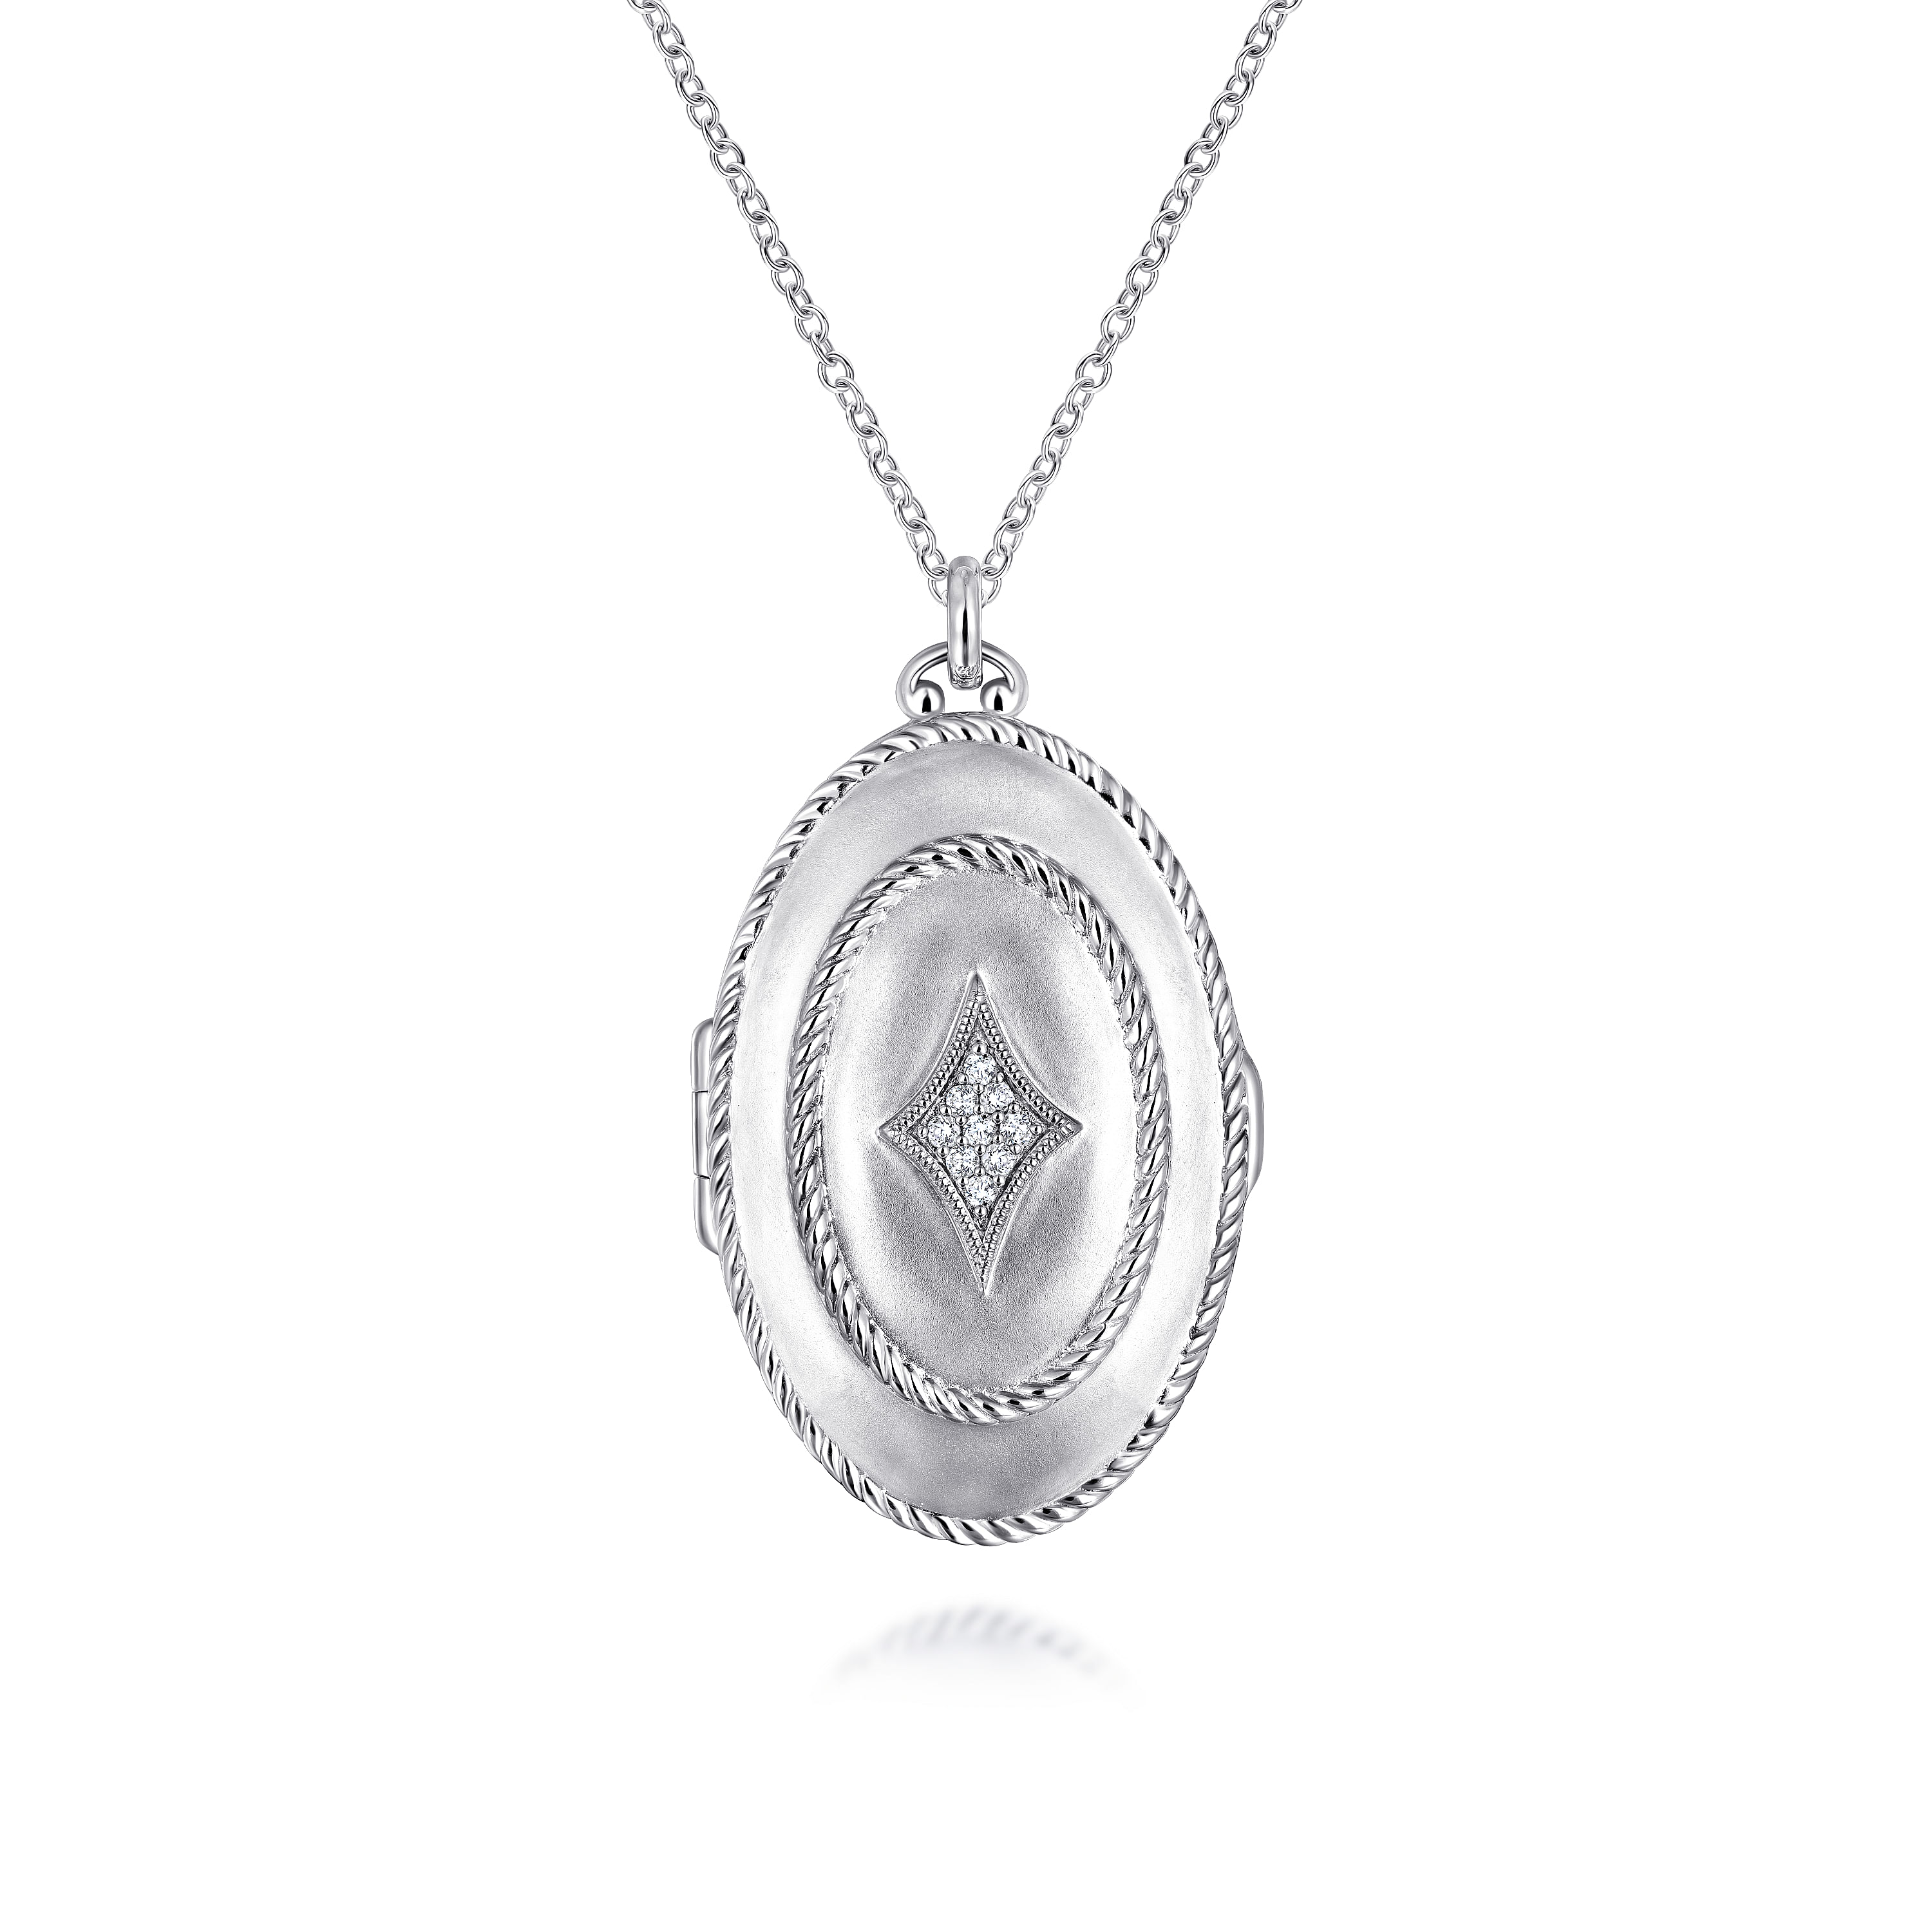 Gabriel - 25 inch 925 Sterling Silver Oval Locket Necklace with White Sapphire